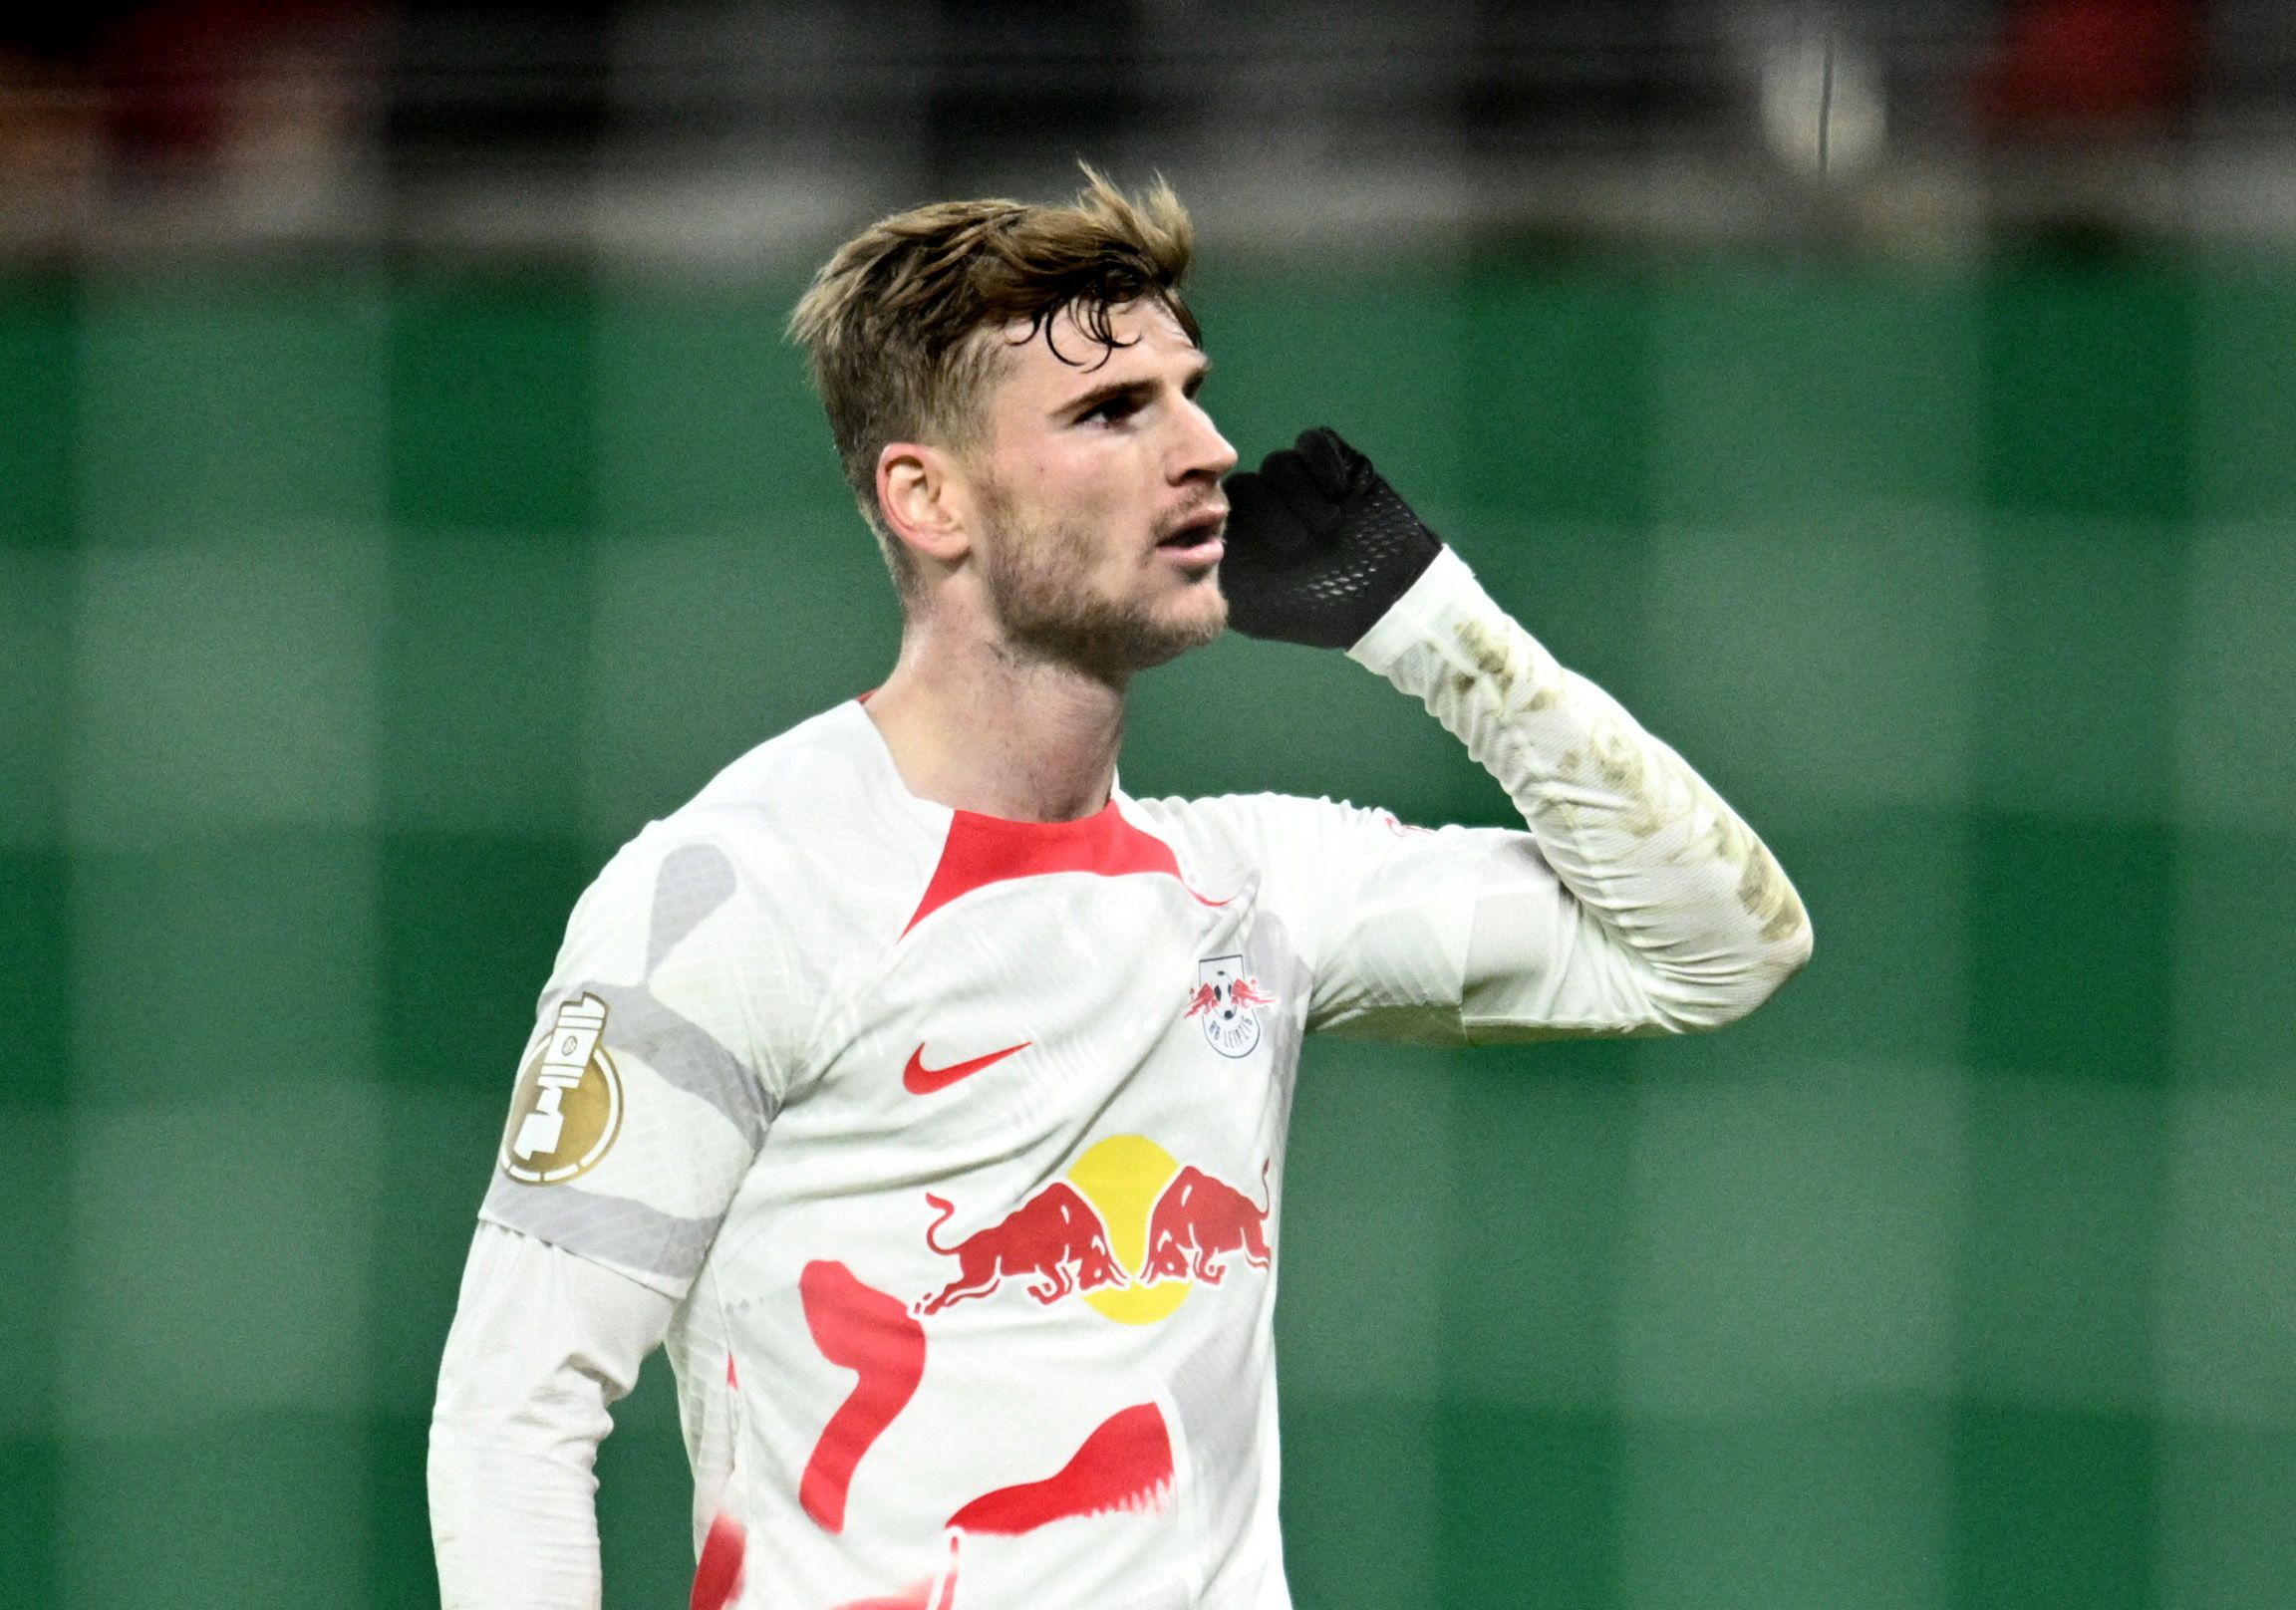 Soccer Football - DFB Cup - Round of 16 - RB Leipzig v TSG 1899 Hoffenheim - Red Bull Arena, Leipzig, Germany - February 1, 2023 RB Leipzig's Timo Werner celebrates scoring their third goal REUTERS/Annegret Hilse DFB REGULATIONS PROHIBIT ANY USE OF PHOTOGRAPHS AS IMAGE SEQUENCES AND/OR QUASI-VIDEO.